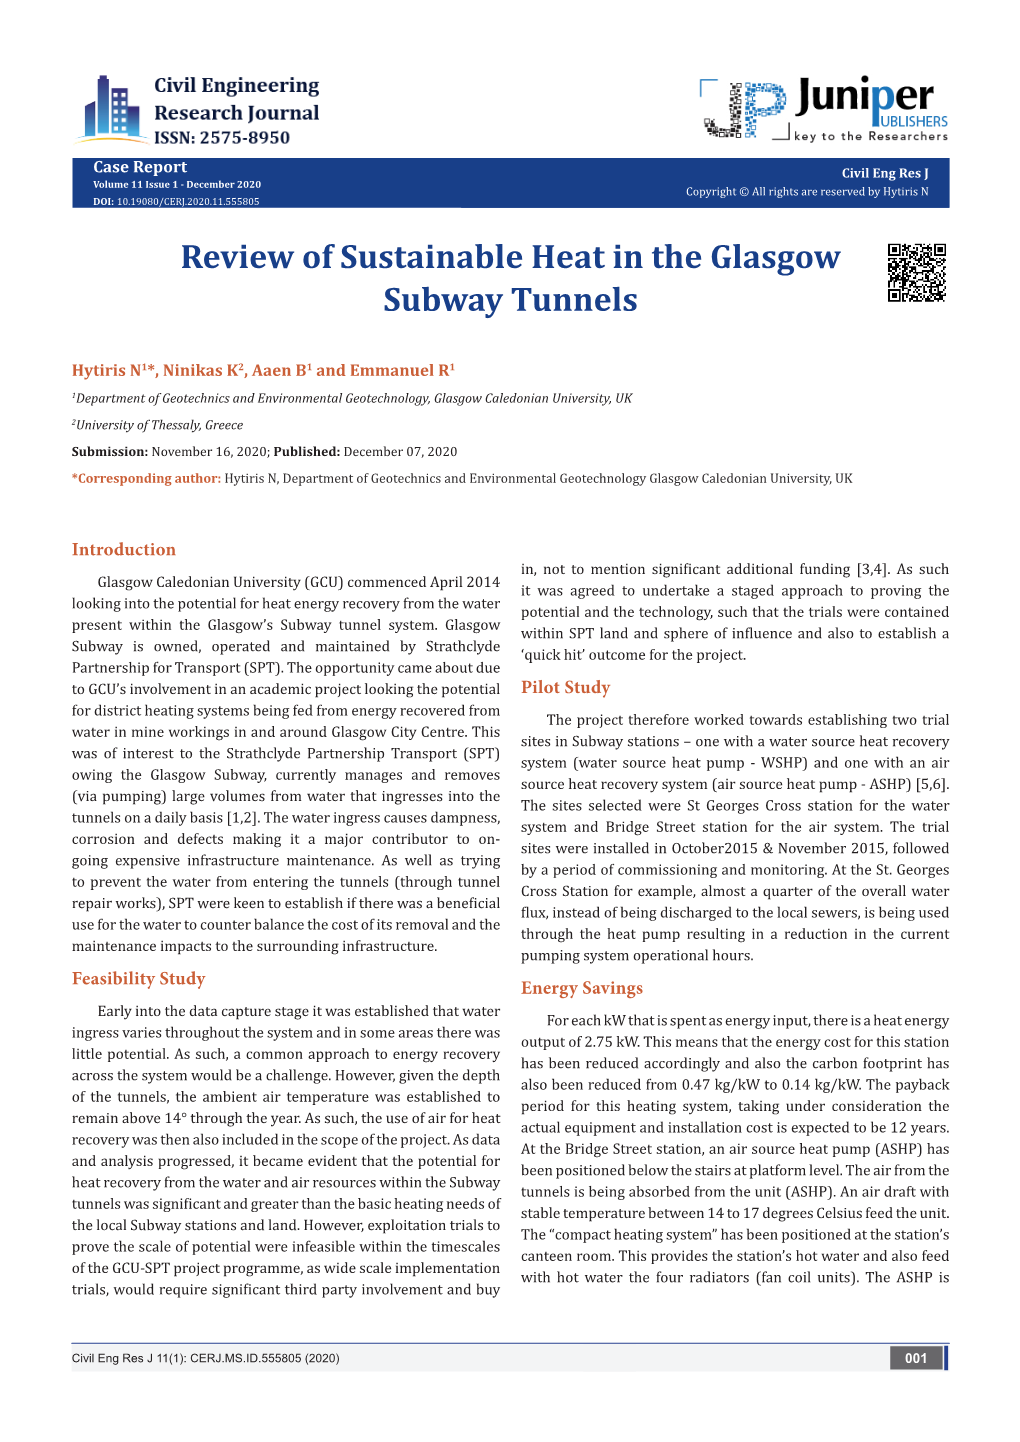 Review of Sustainable Heat in the Glasgow Subway Tunnels